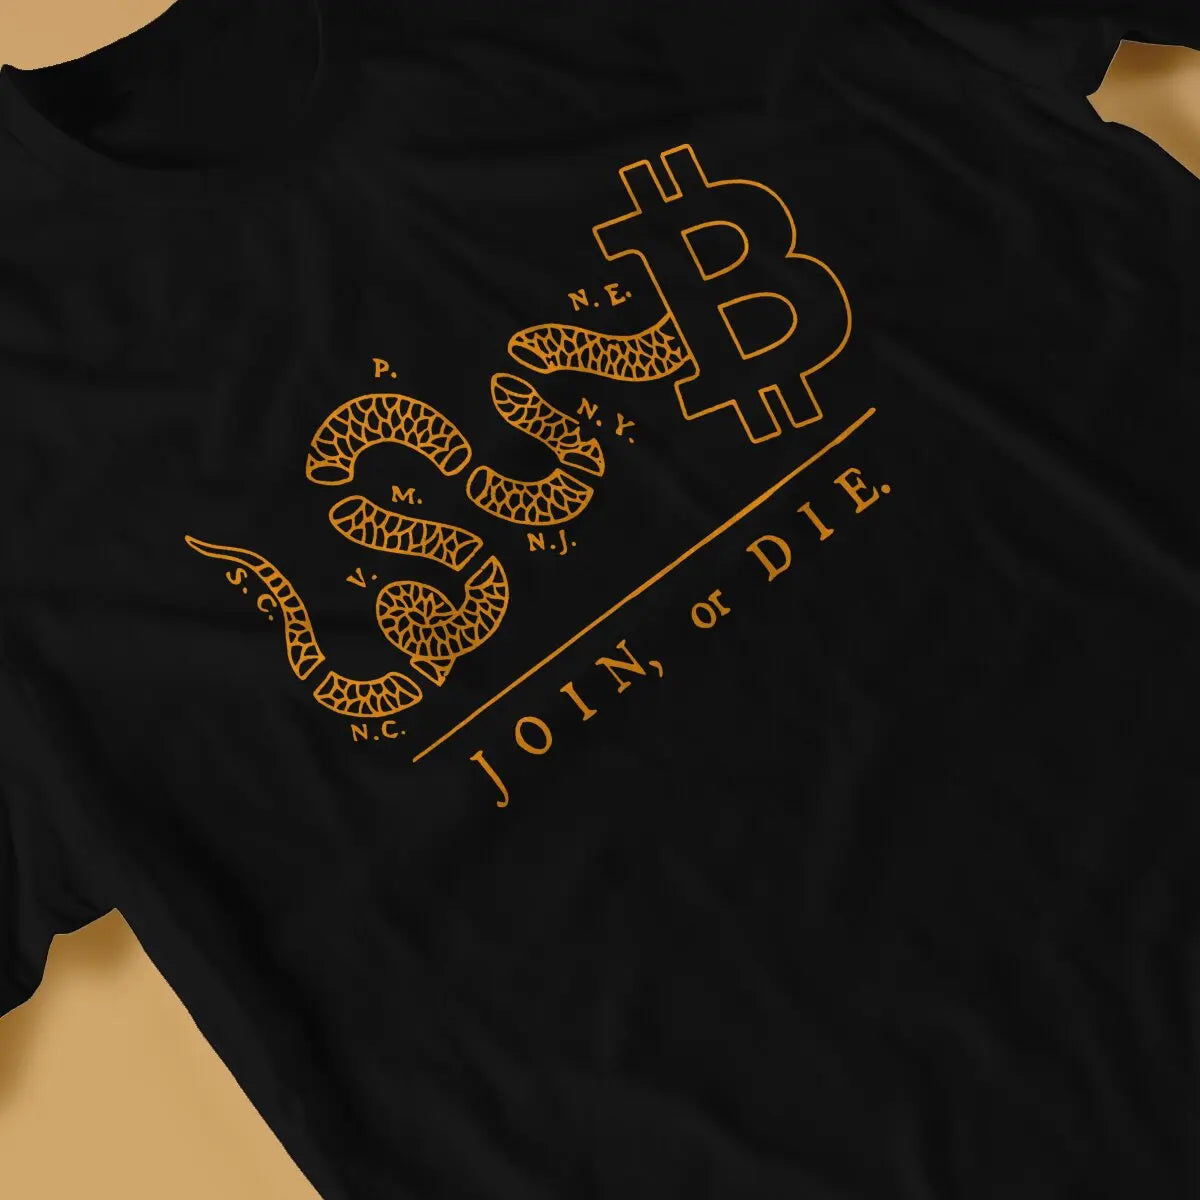 Join BTC or Die T-Shirt